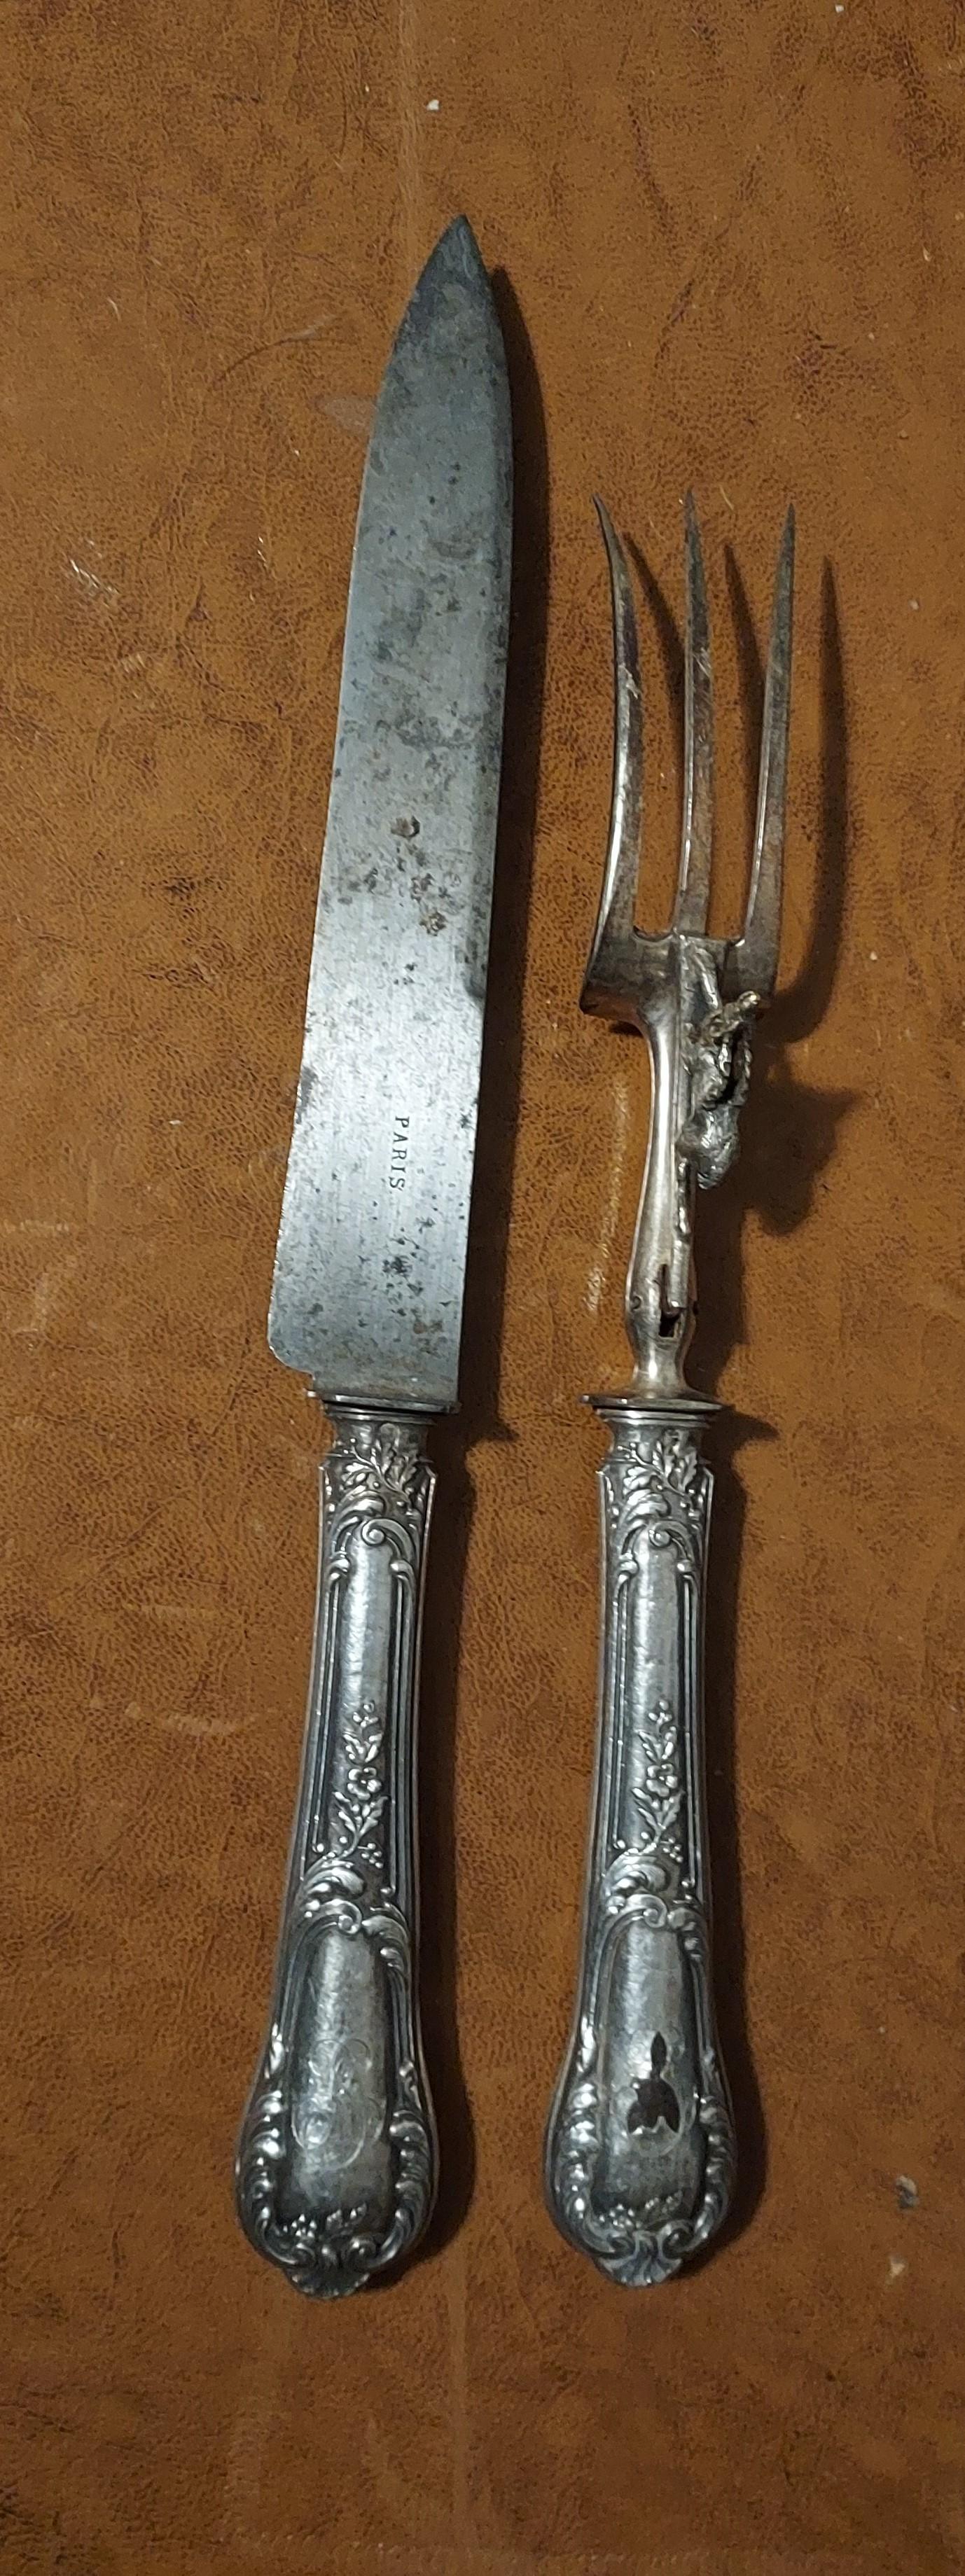 Antique Silver Carving Set of Knofe and Fork embellished with a protective Stag For Sale 1